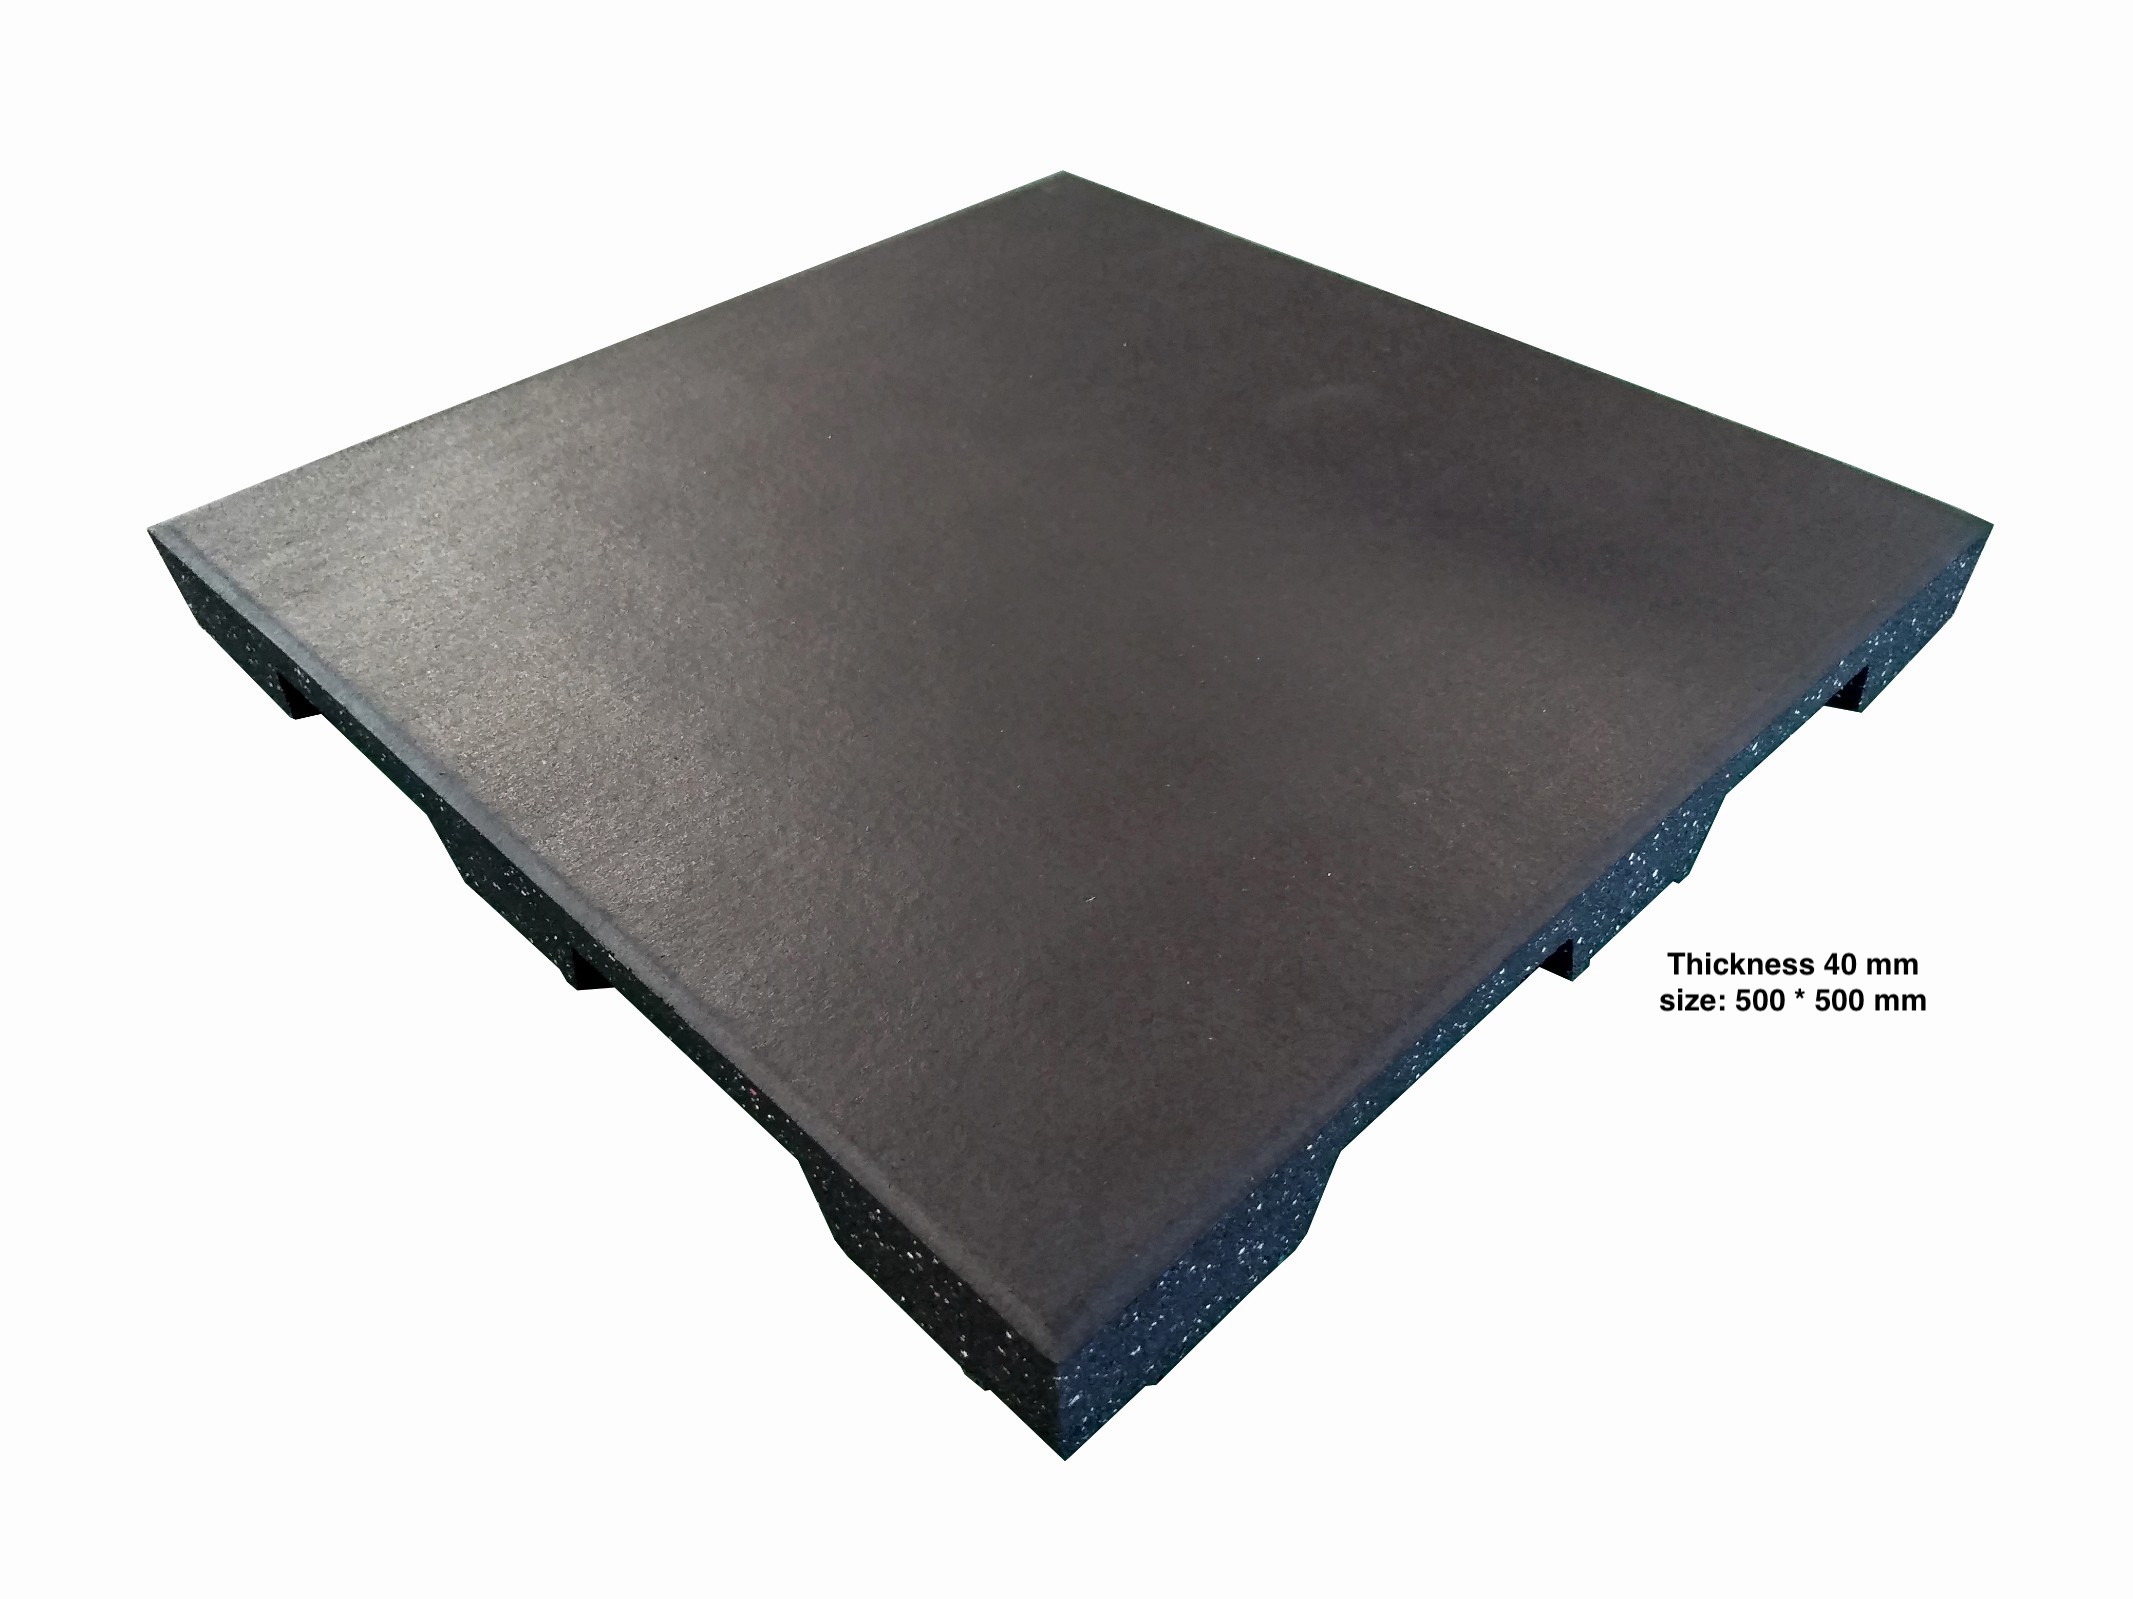 full sound dampening tile that reduces vibration and noise in gyms